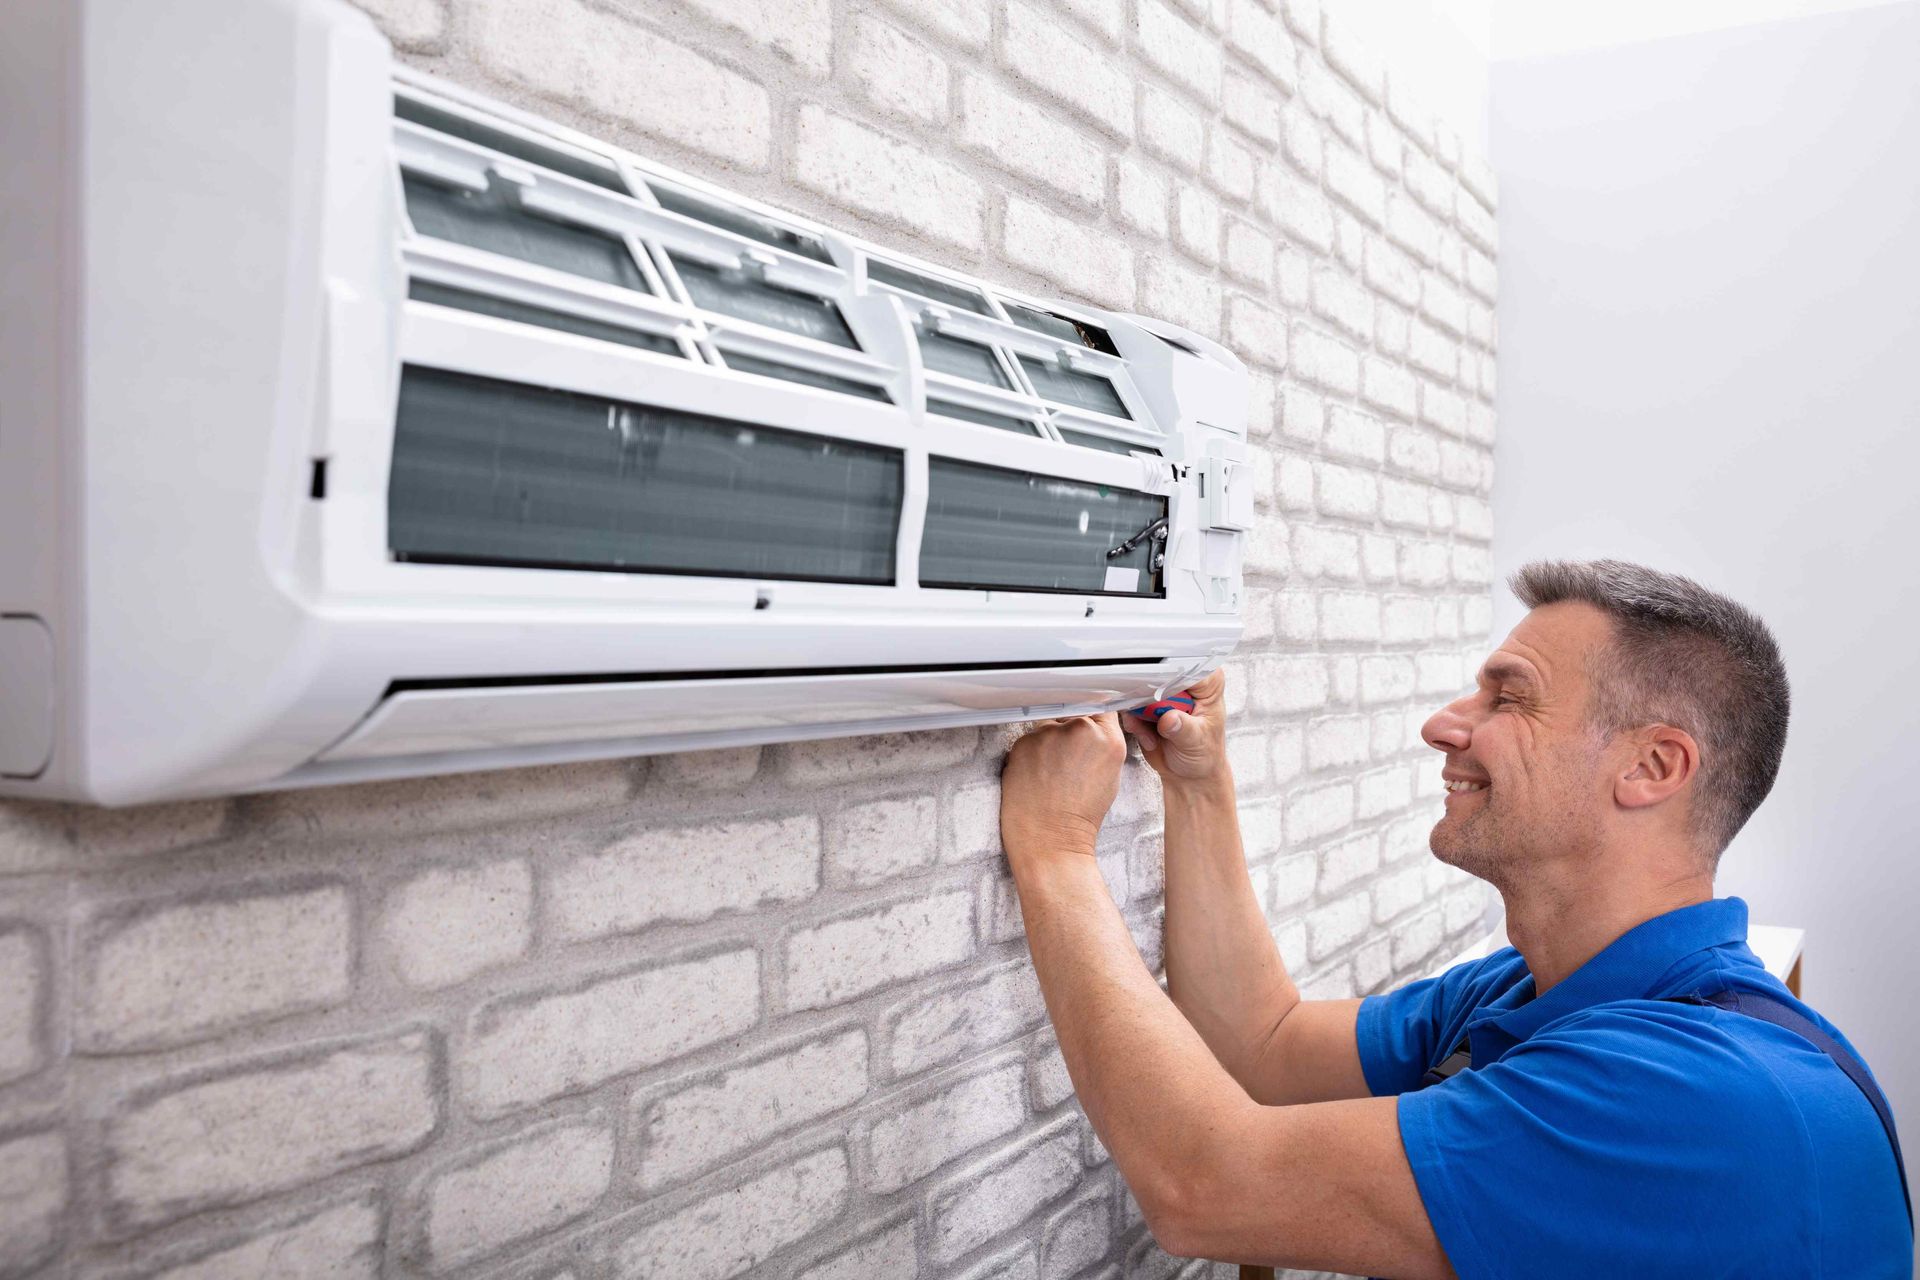 A man checking out an outdoor AC unit for functionality